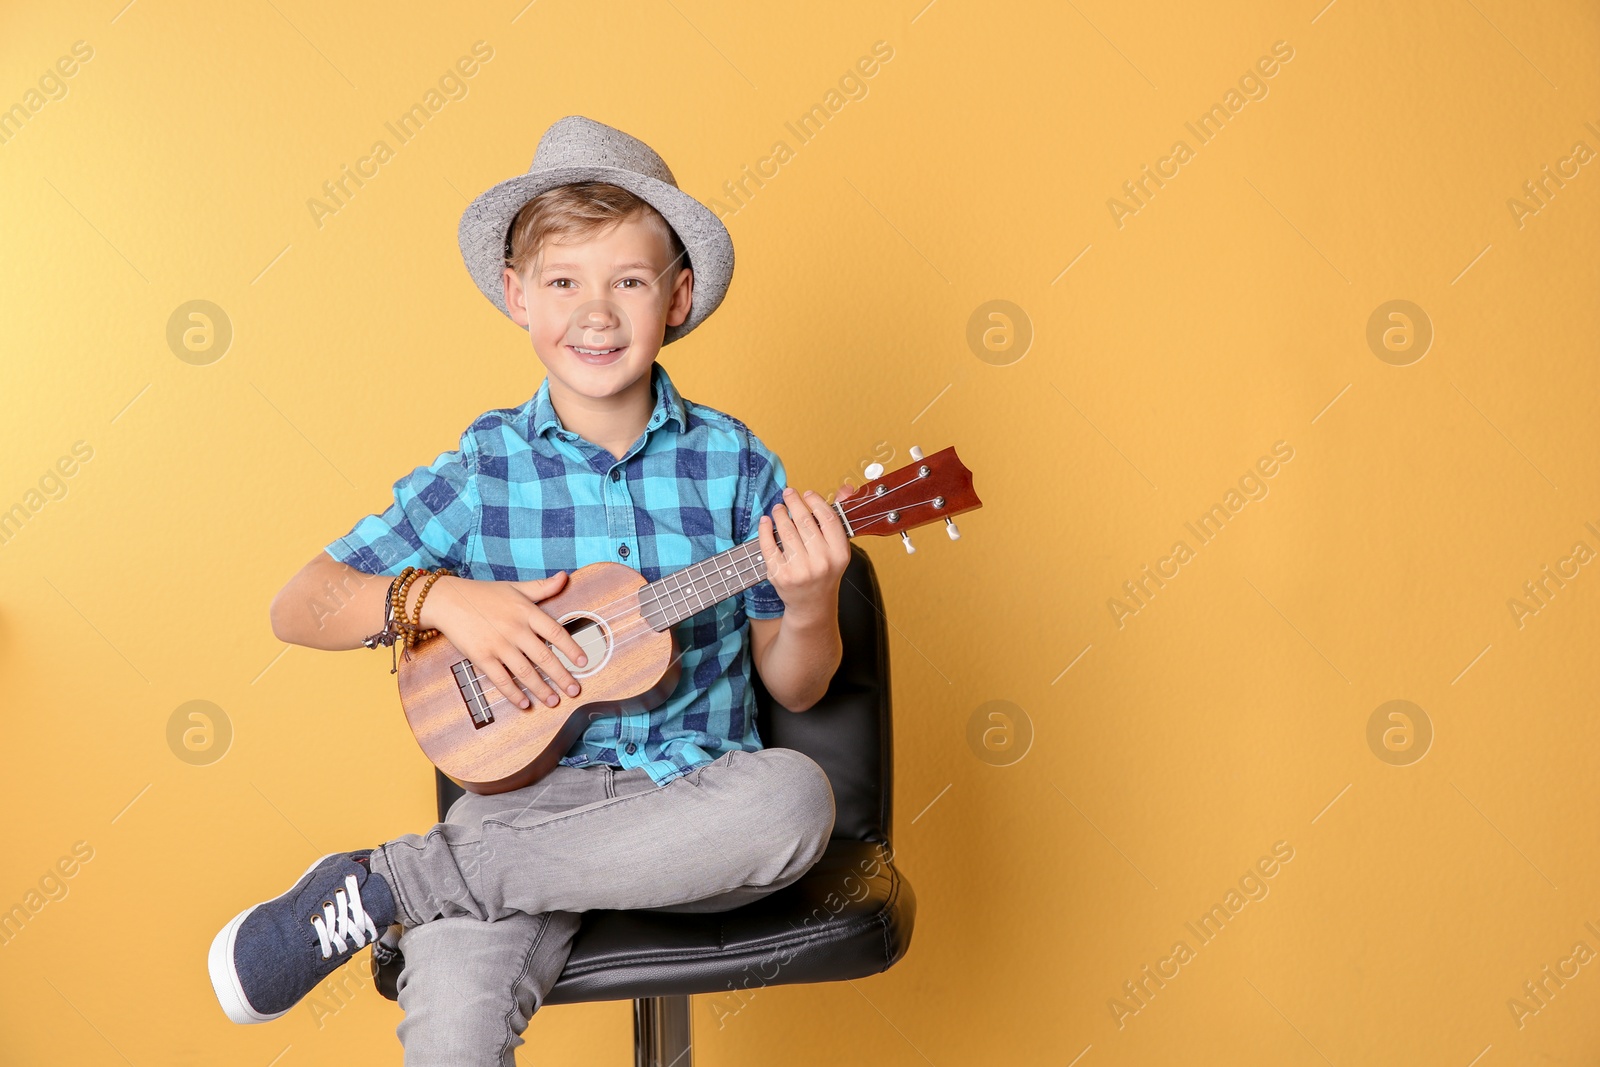 Photo of Little boy sitting on chair and playing guitar against color background. Space for text